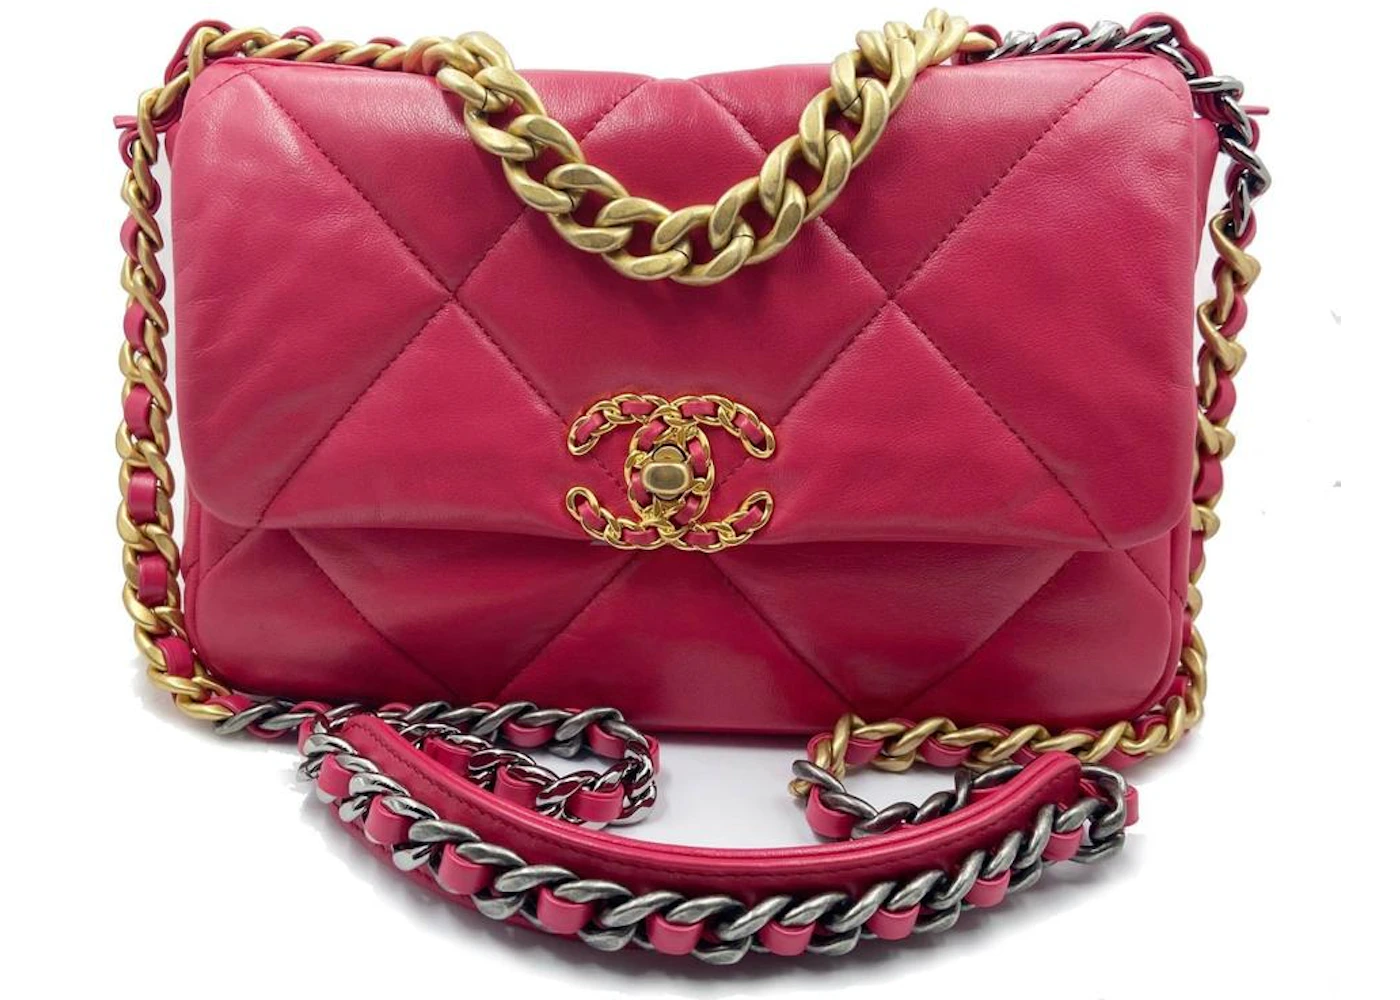 Chanel 19 Flap Bag Large Dark Pink in Lambskin with Gold/Silver